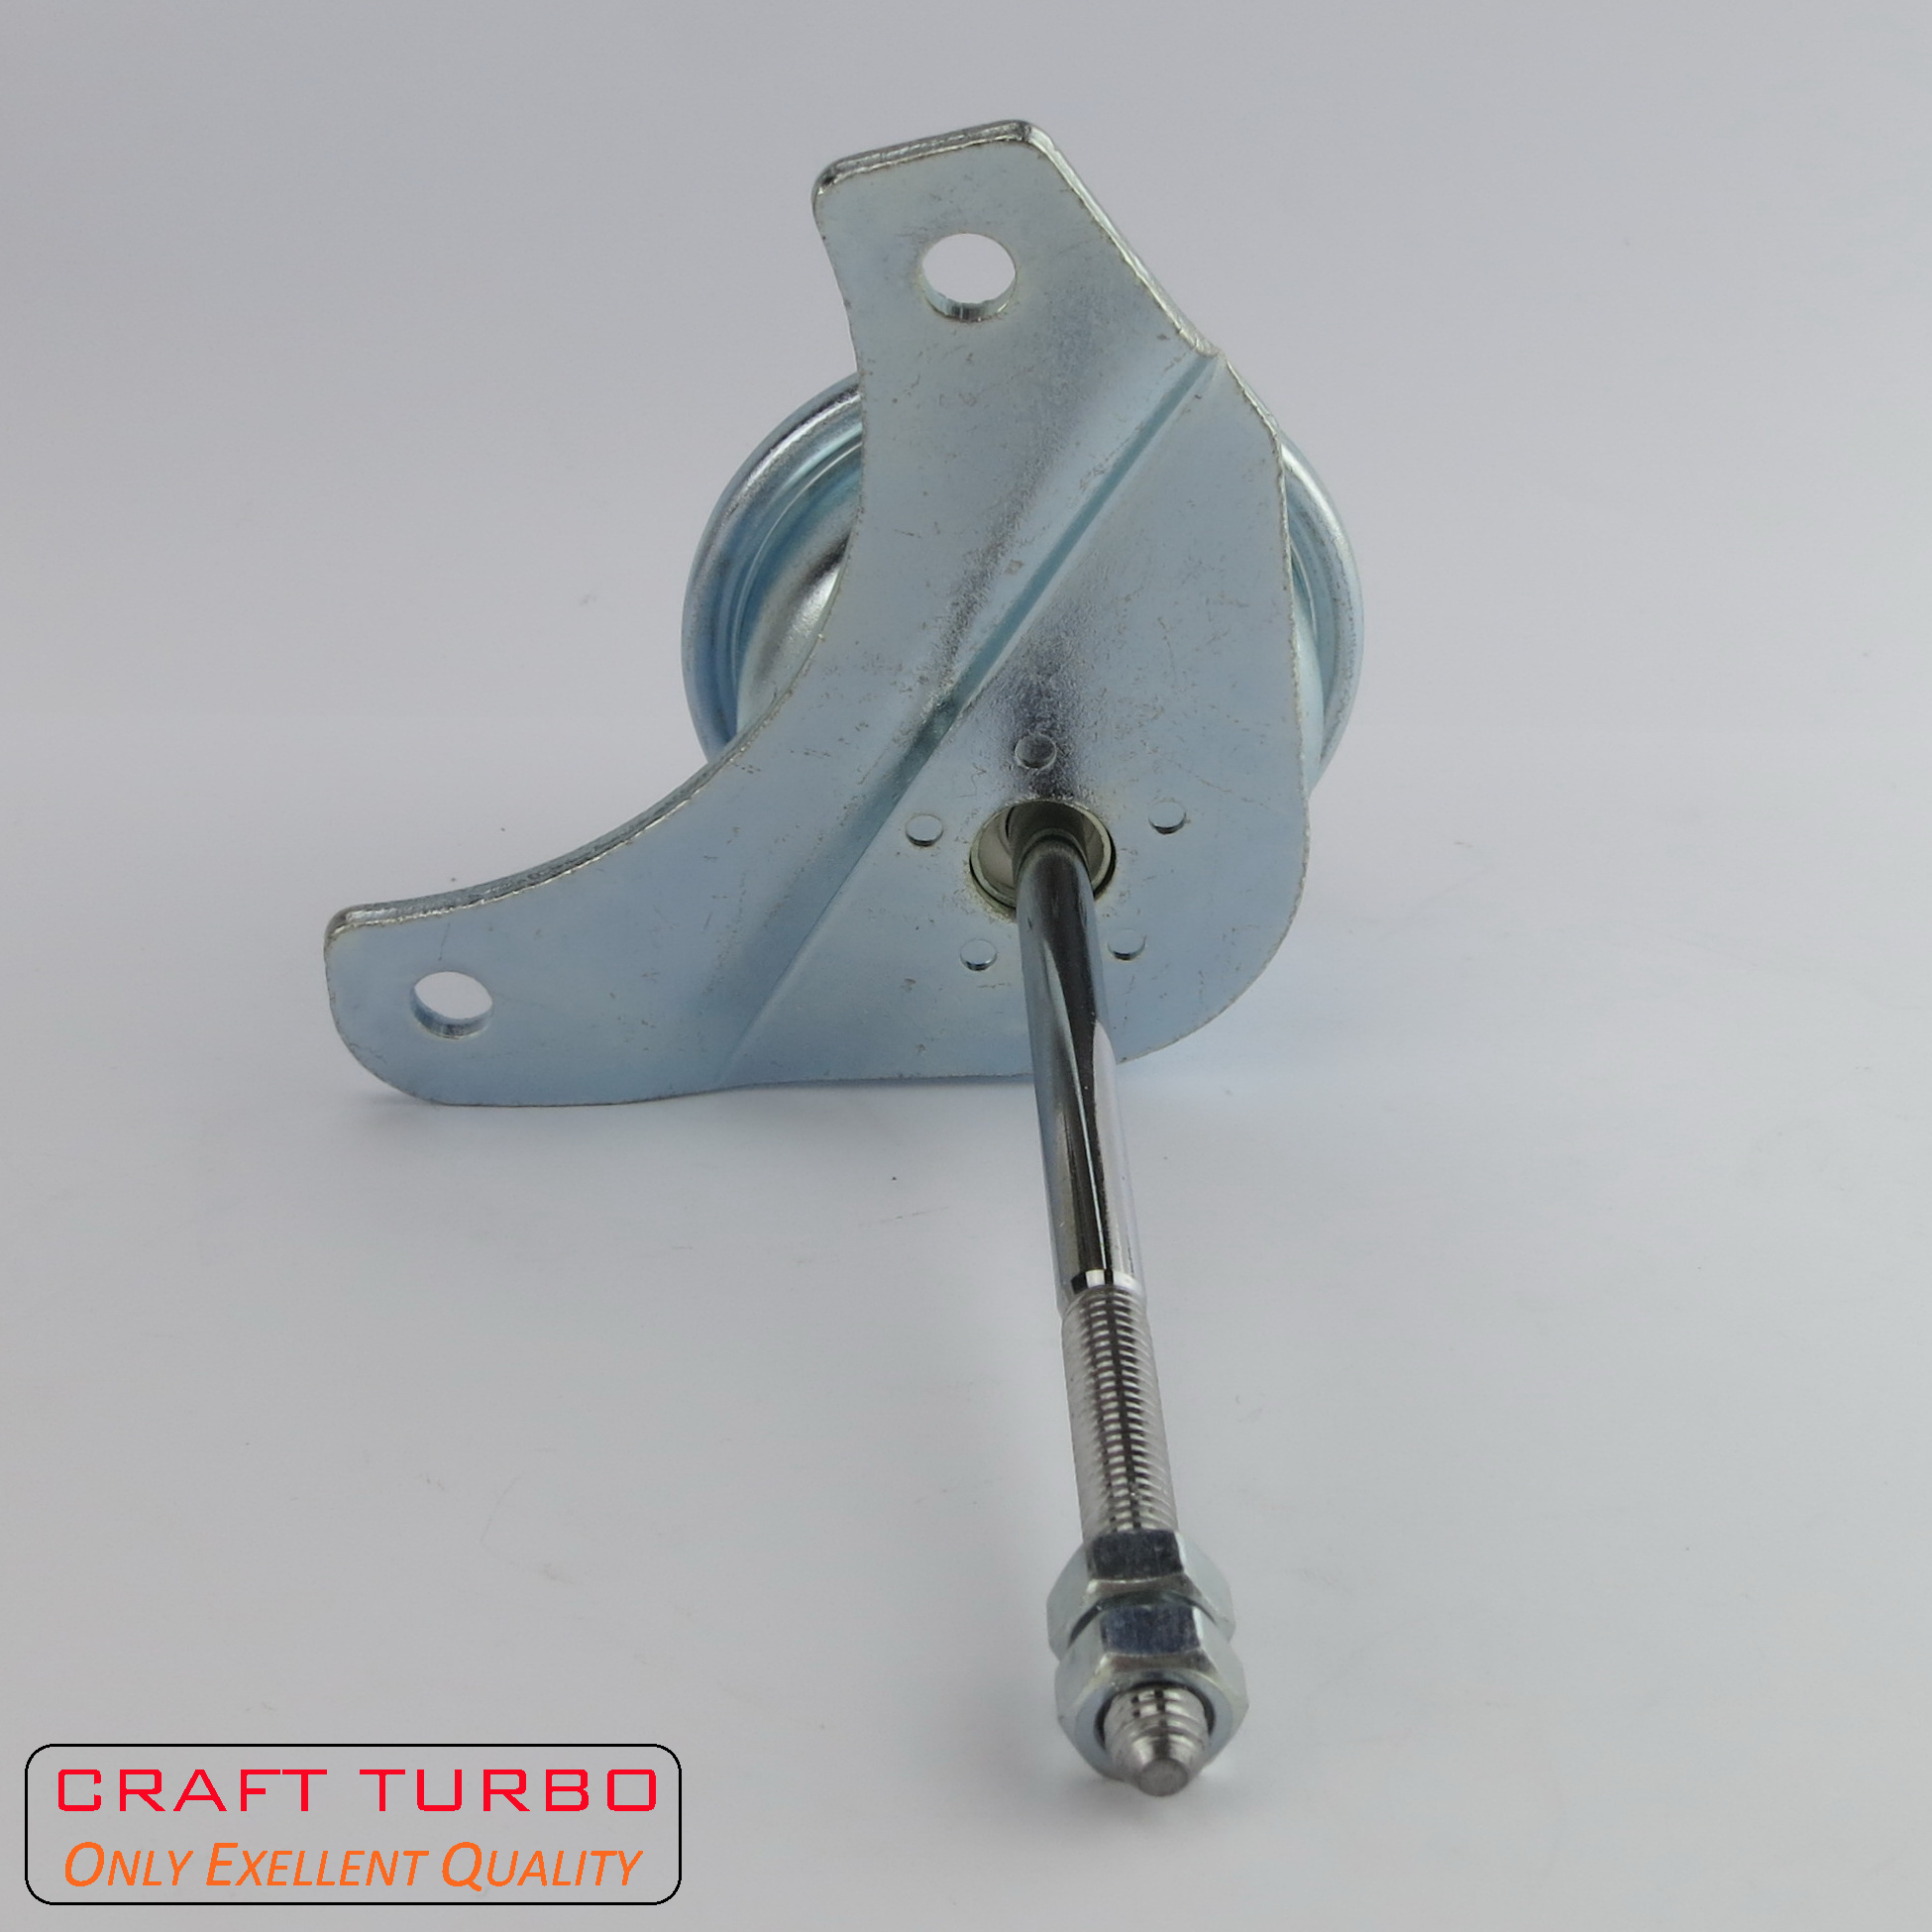 KP35 58201104180/ 5435-988-0009/ 5435-988-0001/ 5435-988-0007/ 5435-970-0001 Actuator for Turbochargers 